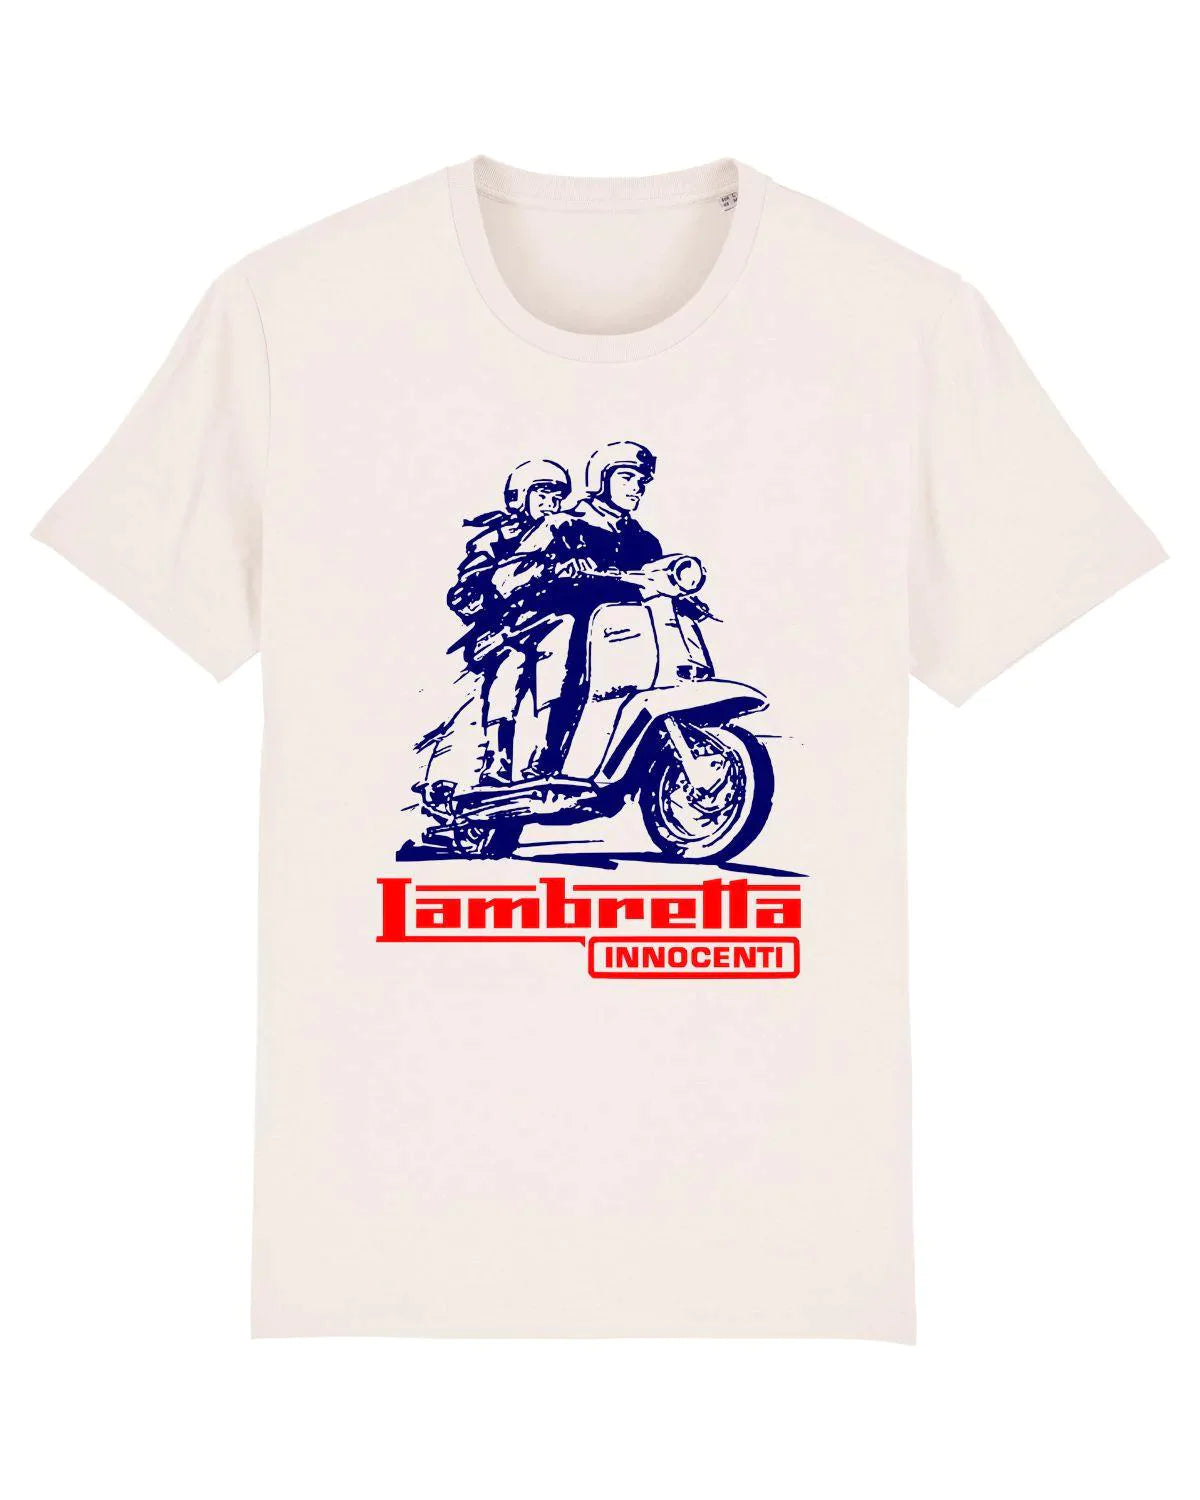 PACEMAKER: T-Shirt Inspired by Classic Lambretta Scooters (With or Without Logo) - SOUND IS COLOUR